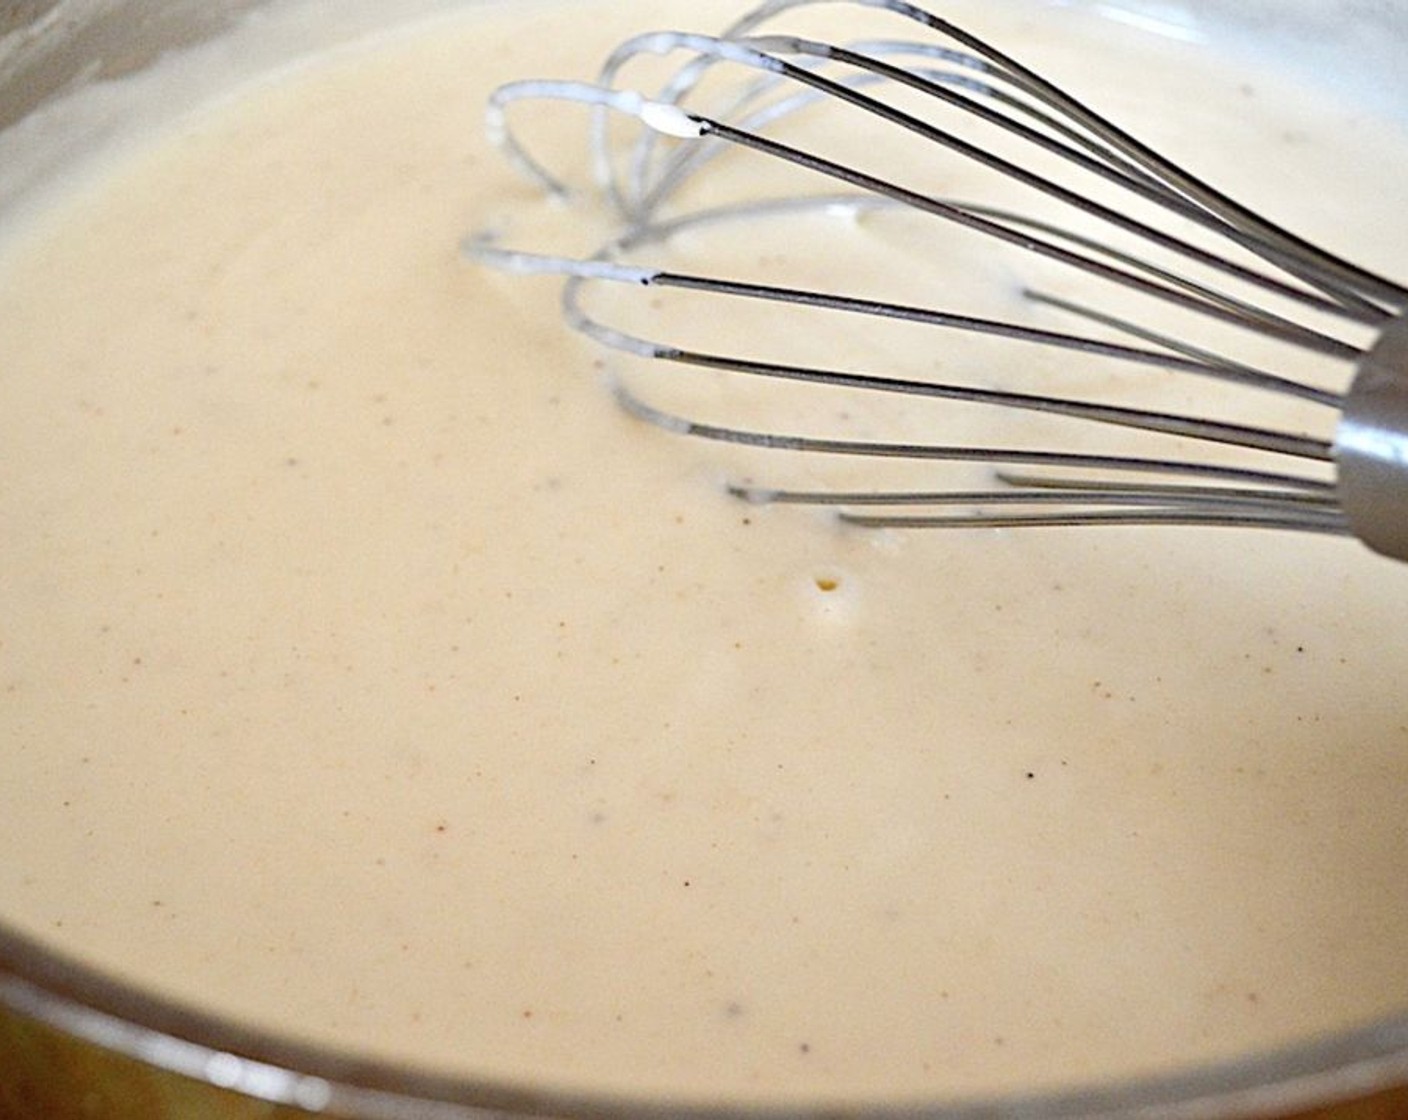 step 6 Slowly pour in the Milk (3 cups) while you keep whisking to bring the béchamel sauce base together. Season it with Salt (to taste) and Ground Nutmeg (1/4 tsp). Reduce the heat to low and let it bubble and thicken for 10 minutes, whisking it often.